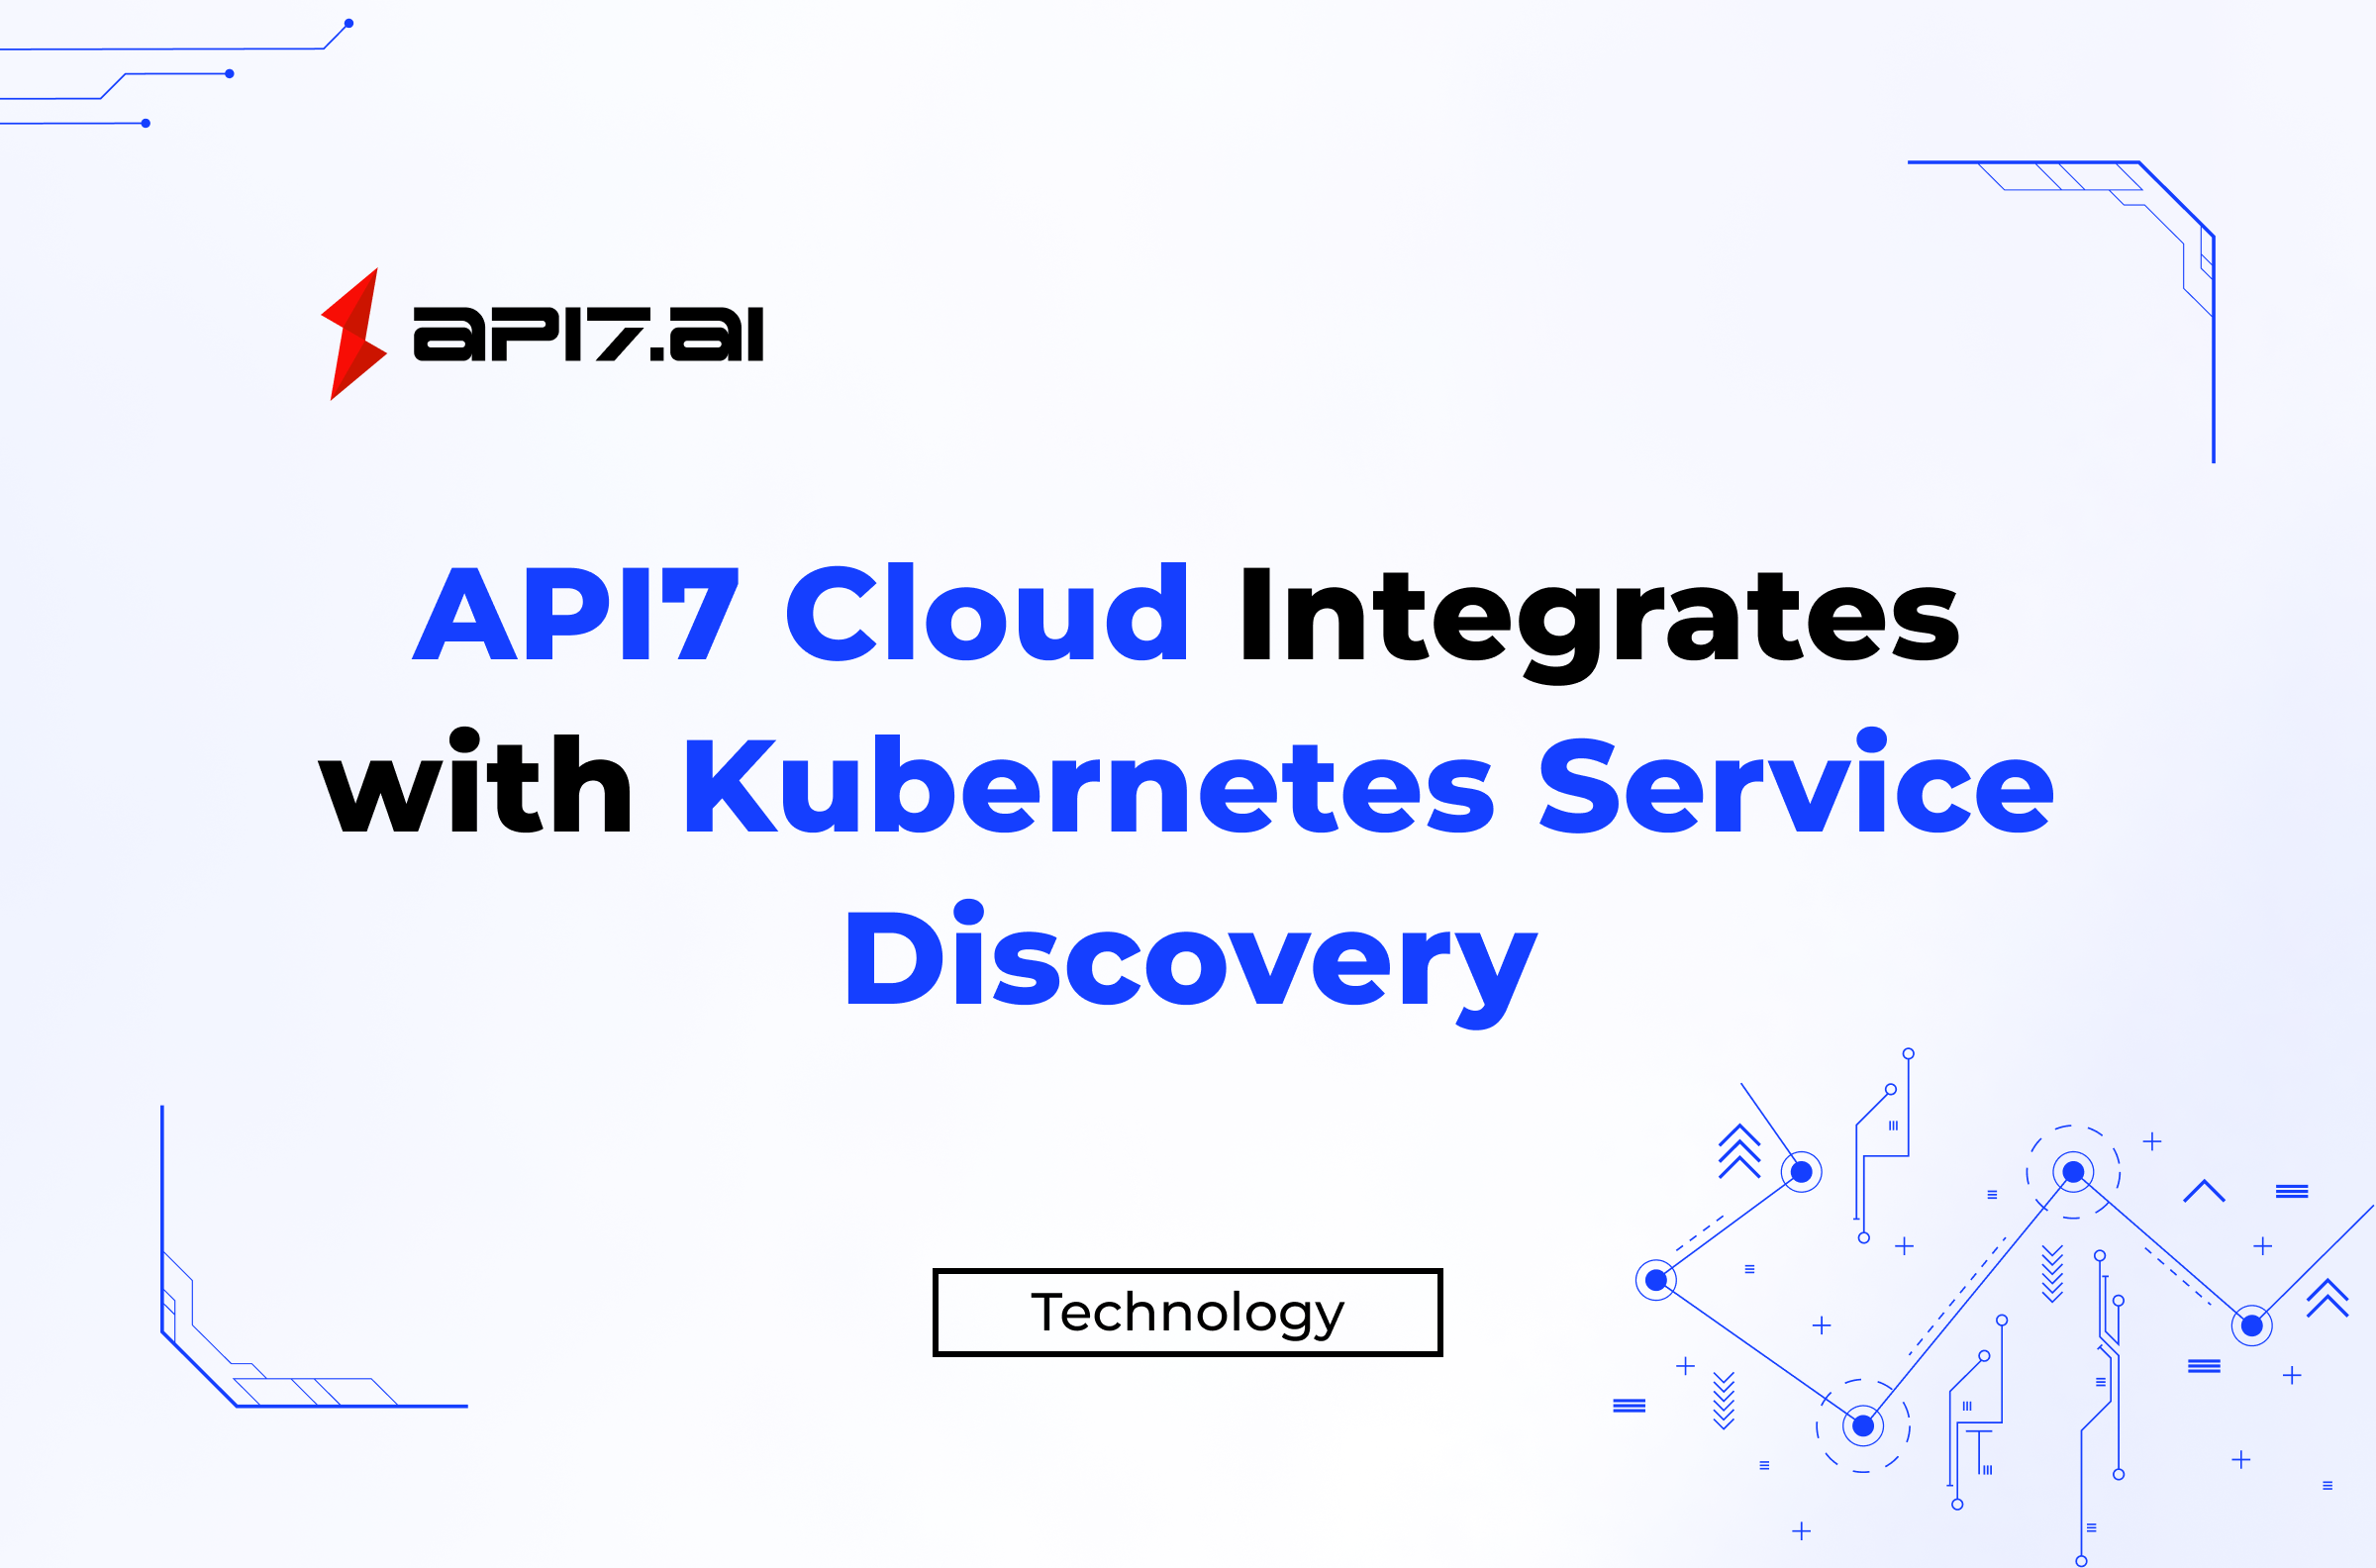 API7 Cloud Integrates with Kubernetes Service Discovery